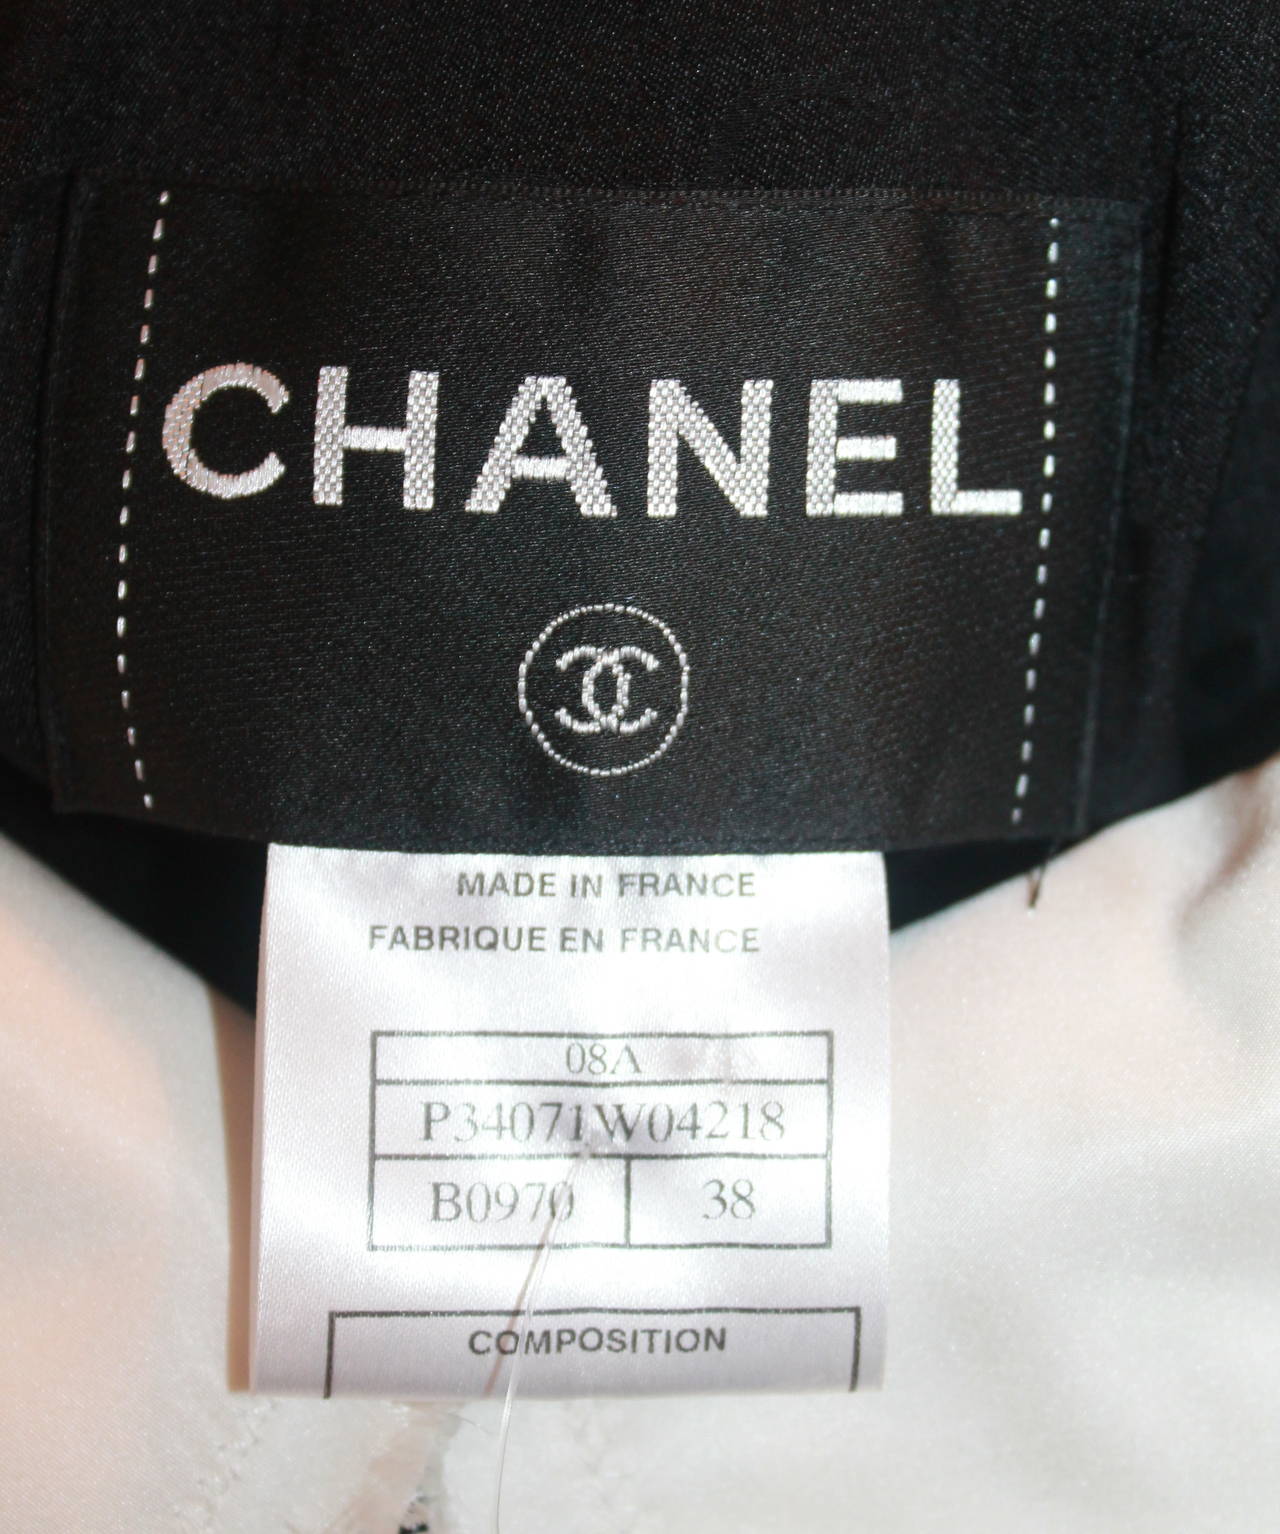 Chanel Black Wool Skirt Suit w/ removable white collar and cuffs-38-2008 4